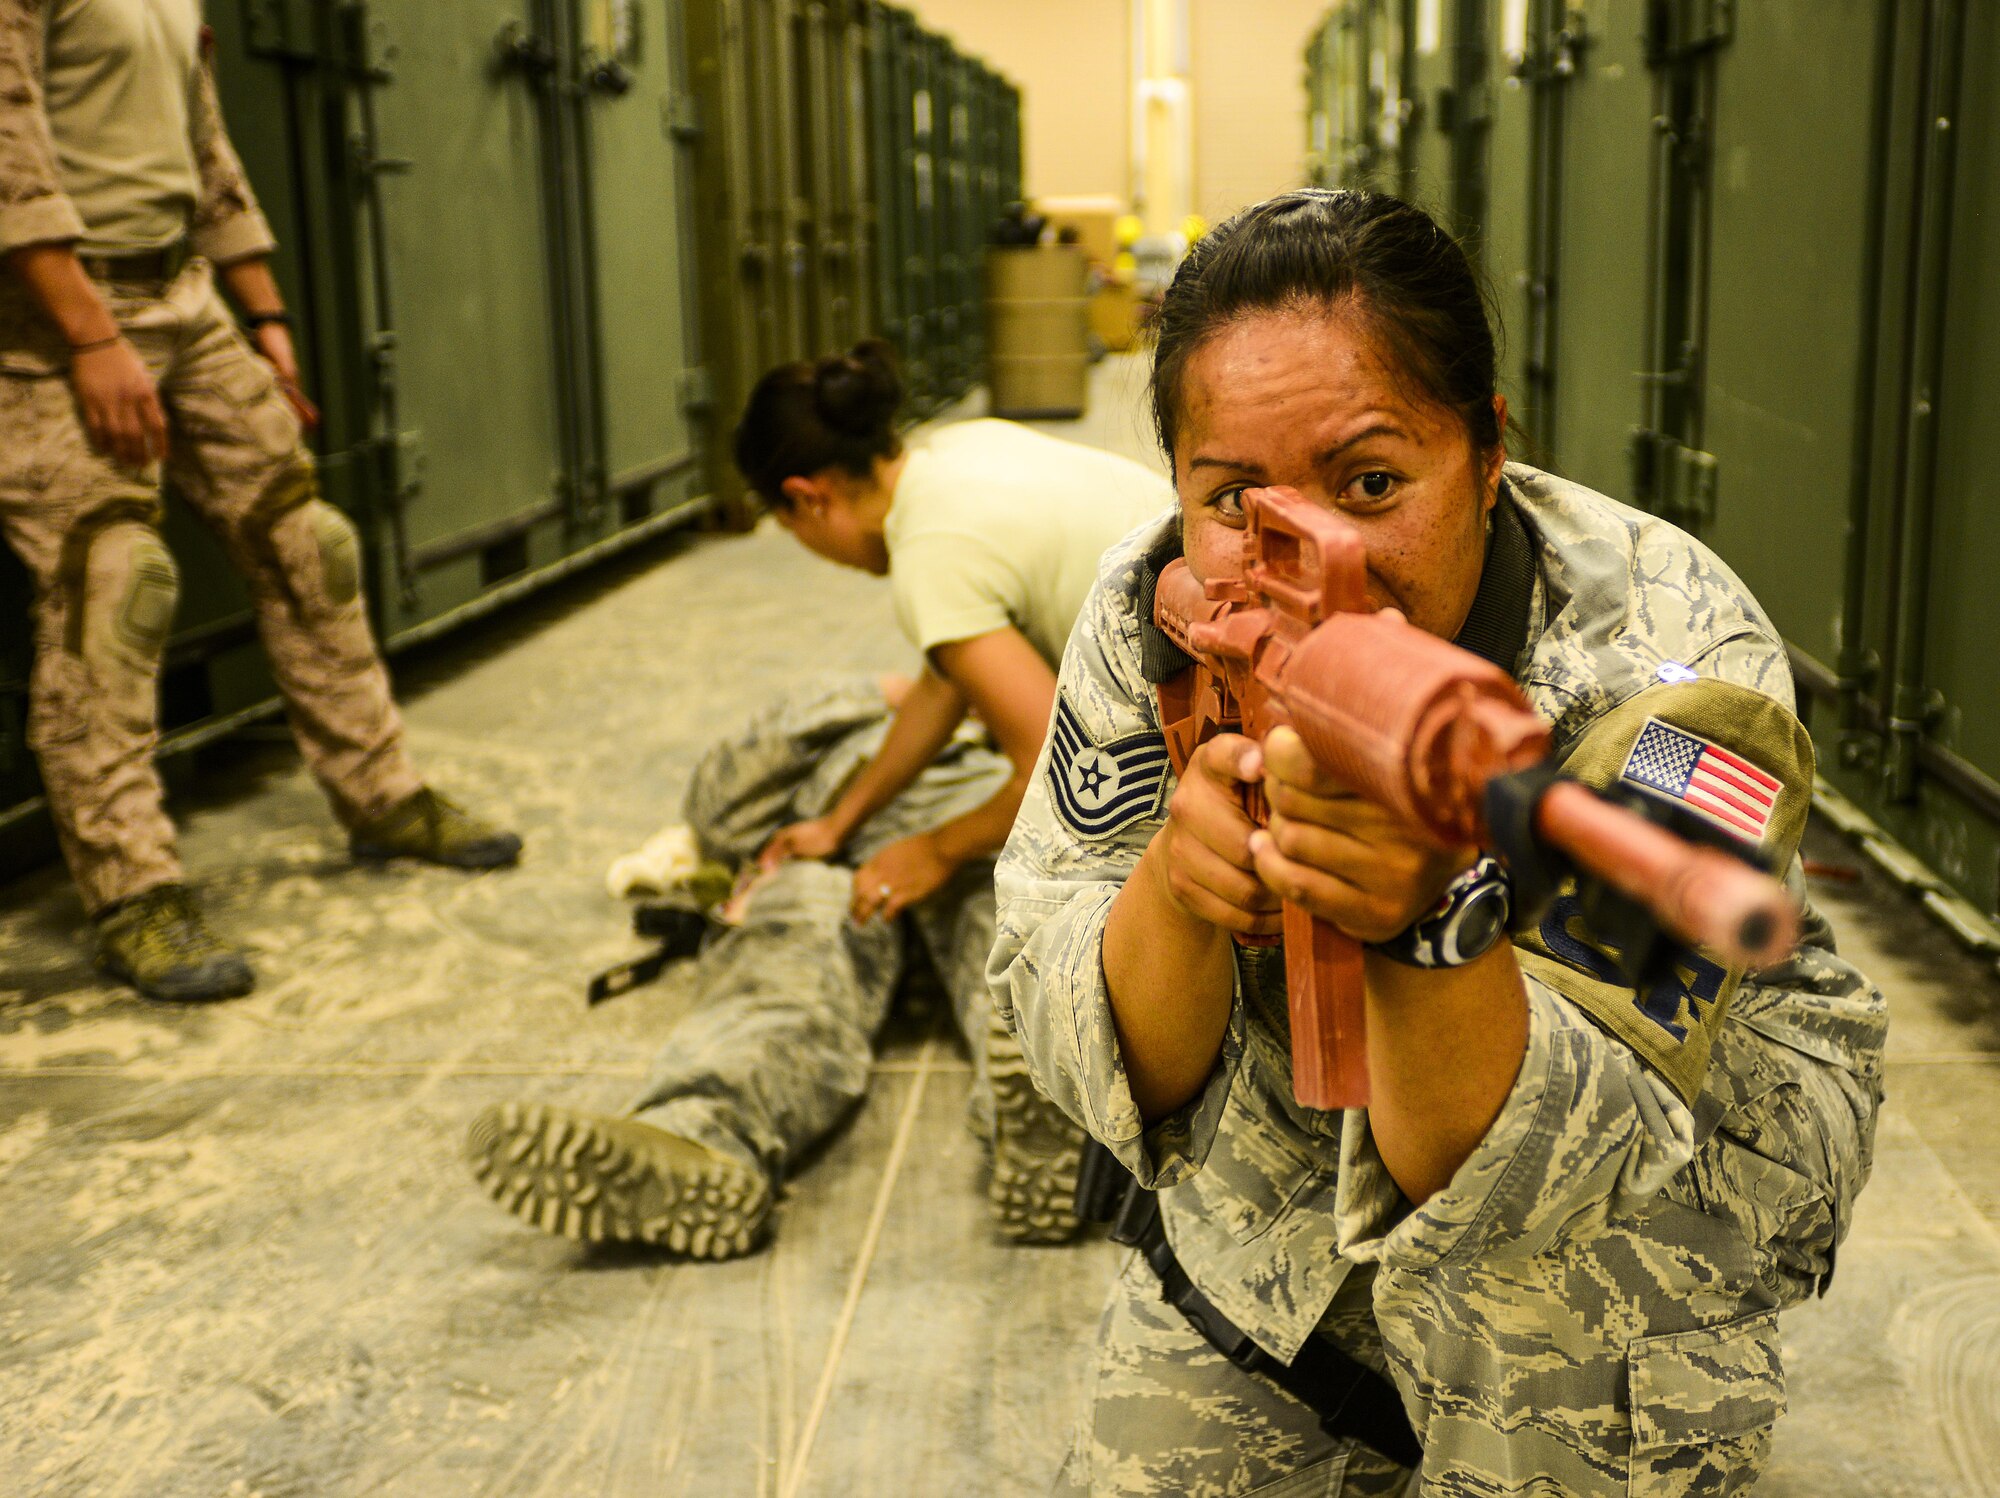 Tech. Sgt. Tashalynn Willing, 379th Expeditionary Security Forces Squadron non-commissioned officer in charge of operations, takes point while Airmen behind her perform care under fire procedures during a tactical combat casualty care scenario April 16, 2015, at a warehouse on Al Udeid Air Base, Qatar. The women of the 379th ESFS learned combatives, personal security detail procedures, treatment of combat trauma wounds, patient sustainment, and transportation.  (U.S. Air Force photo by Tech. Sgt. Caitlyn Thompson)